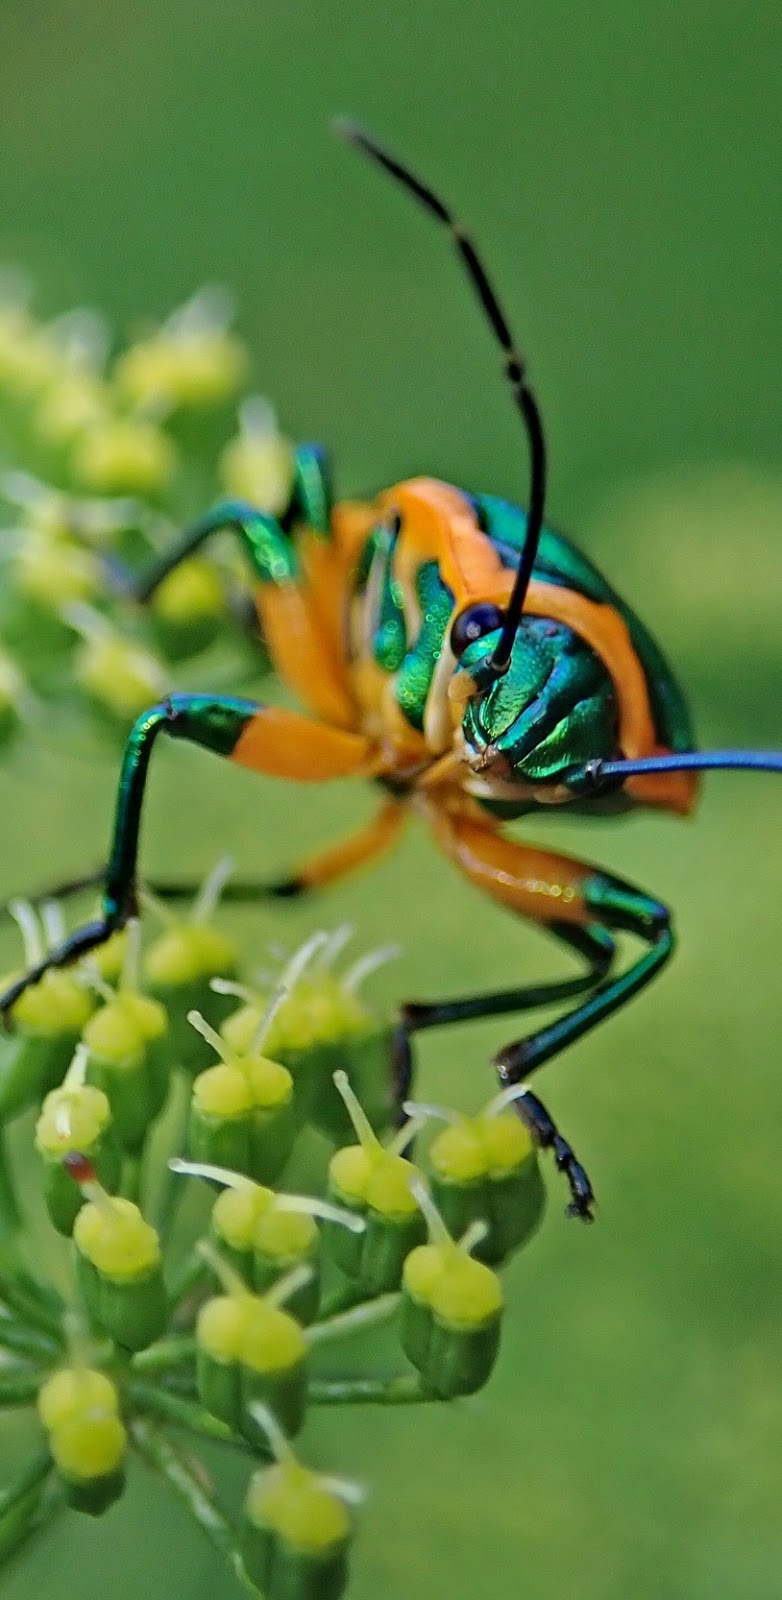 A colorful beetle.